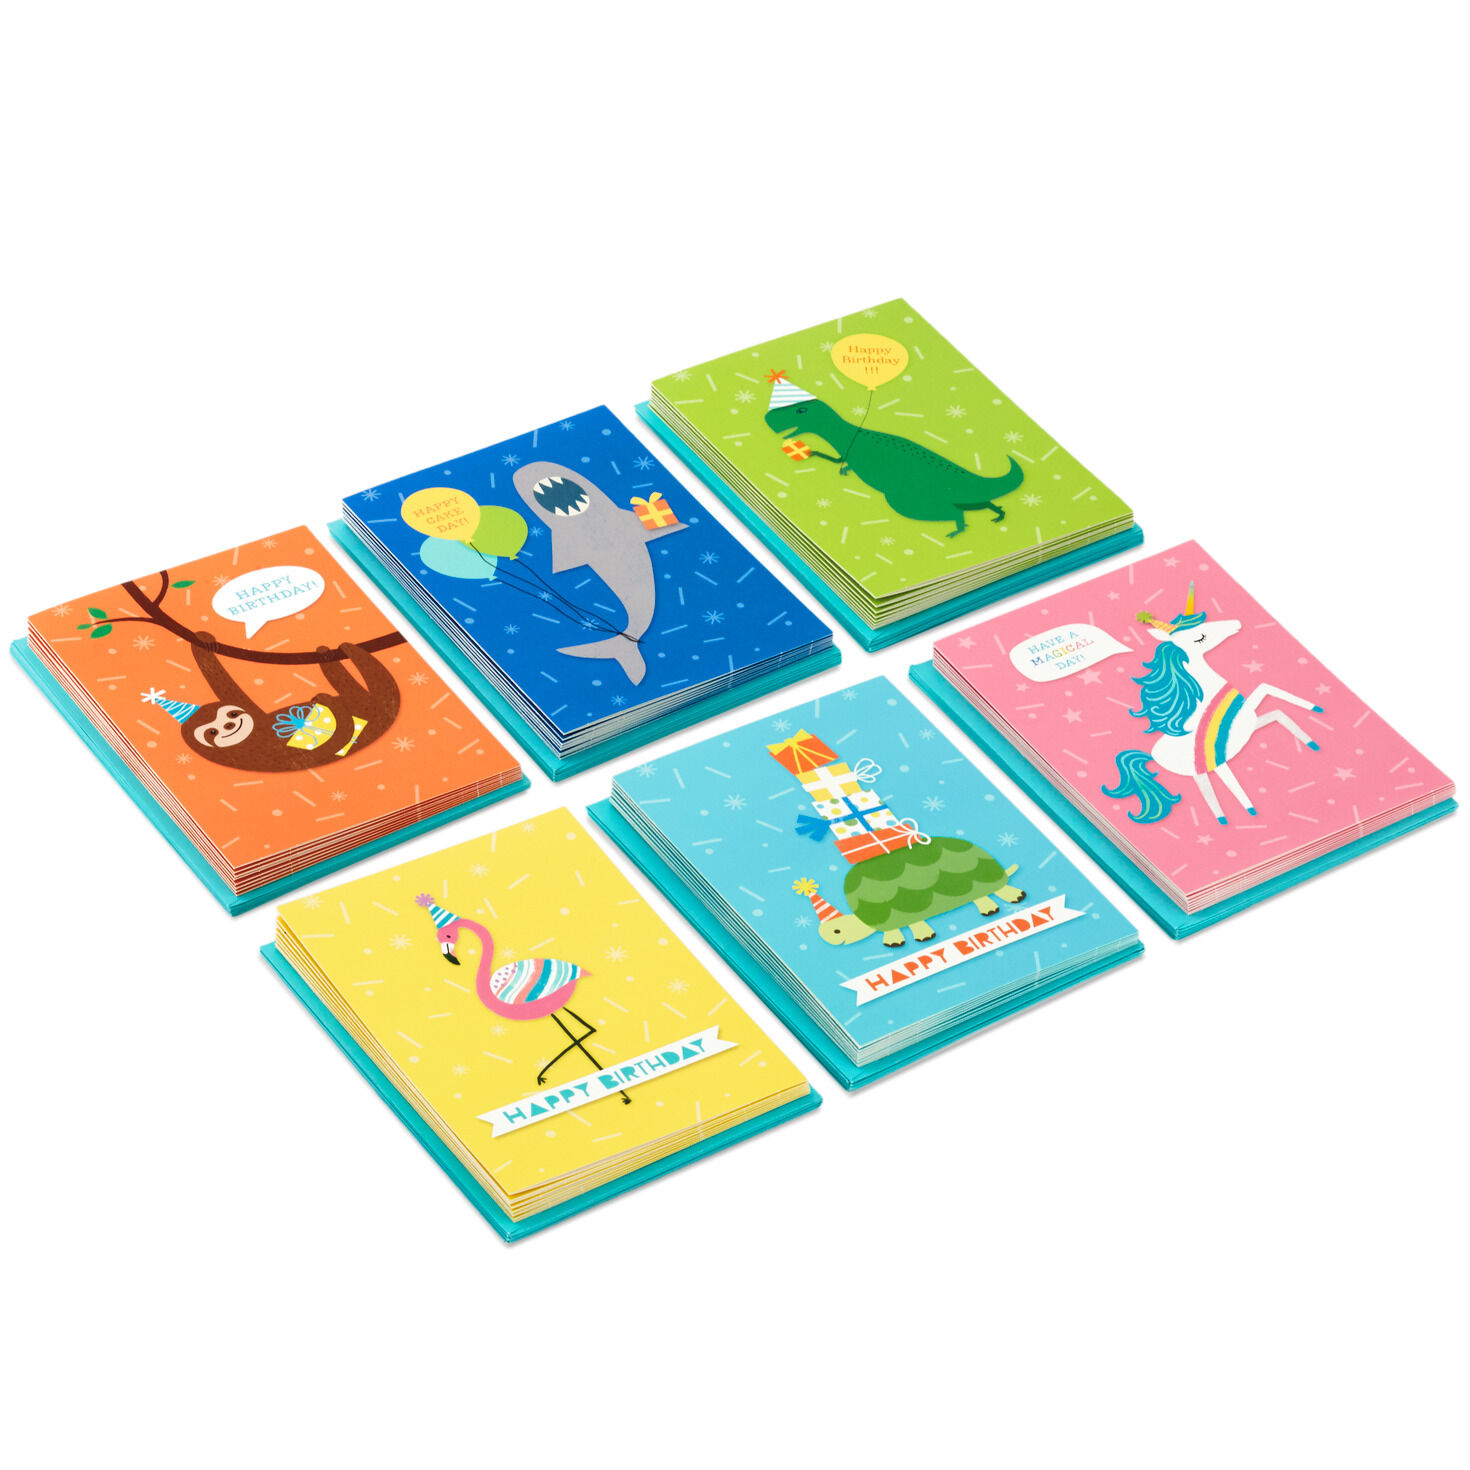 Bulk Packs for Boys and Girls 20 Animal Birthday Cards for Kids Series 2 by Kyobo Creations Envelopes and Stickers Included 